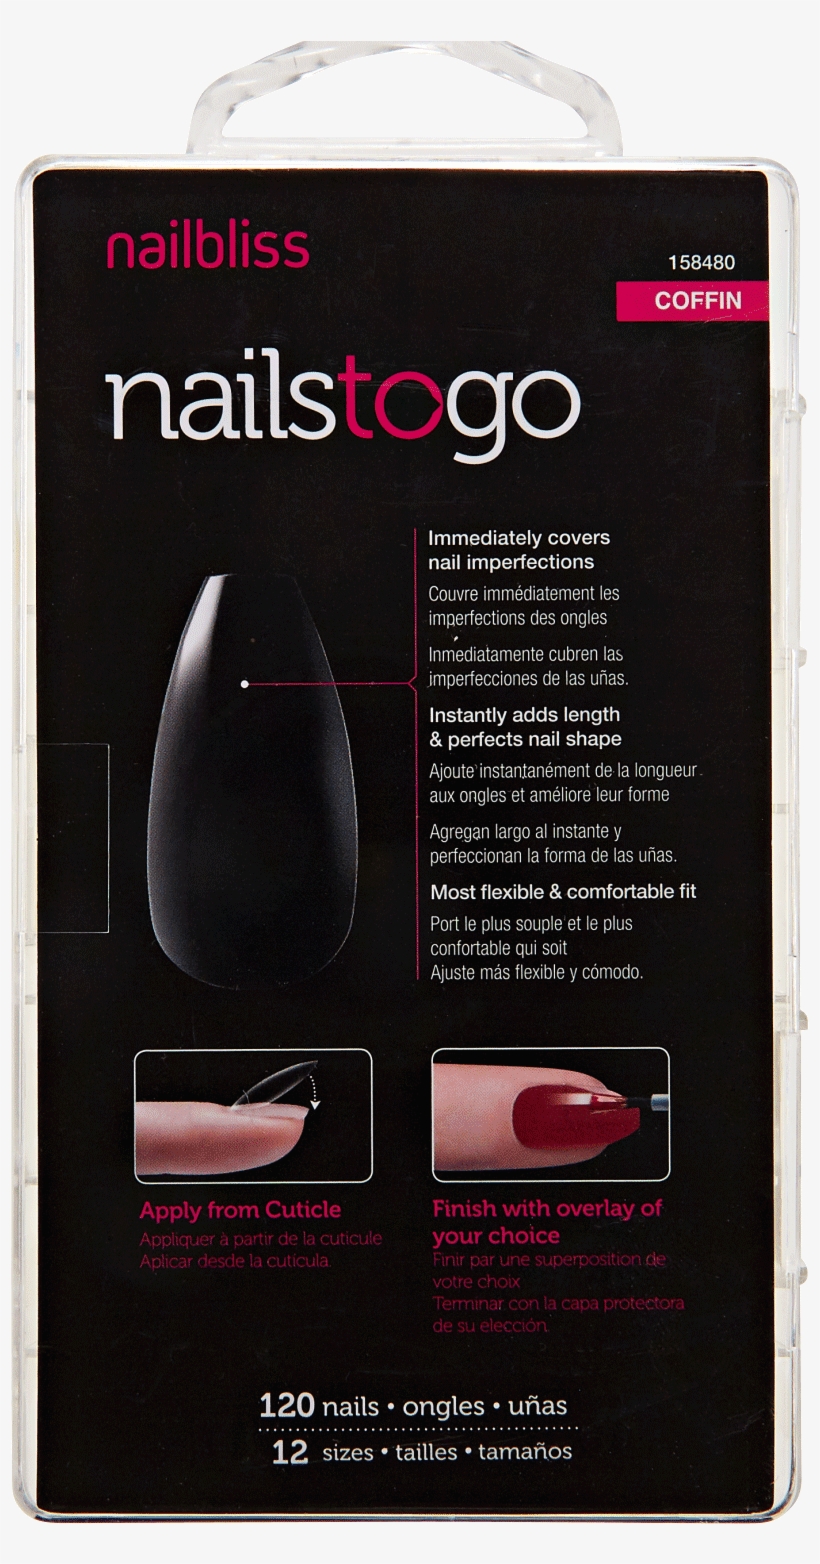 Nailbliss Nails To Go Almond, transparent png #4378870